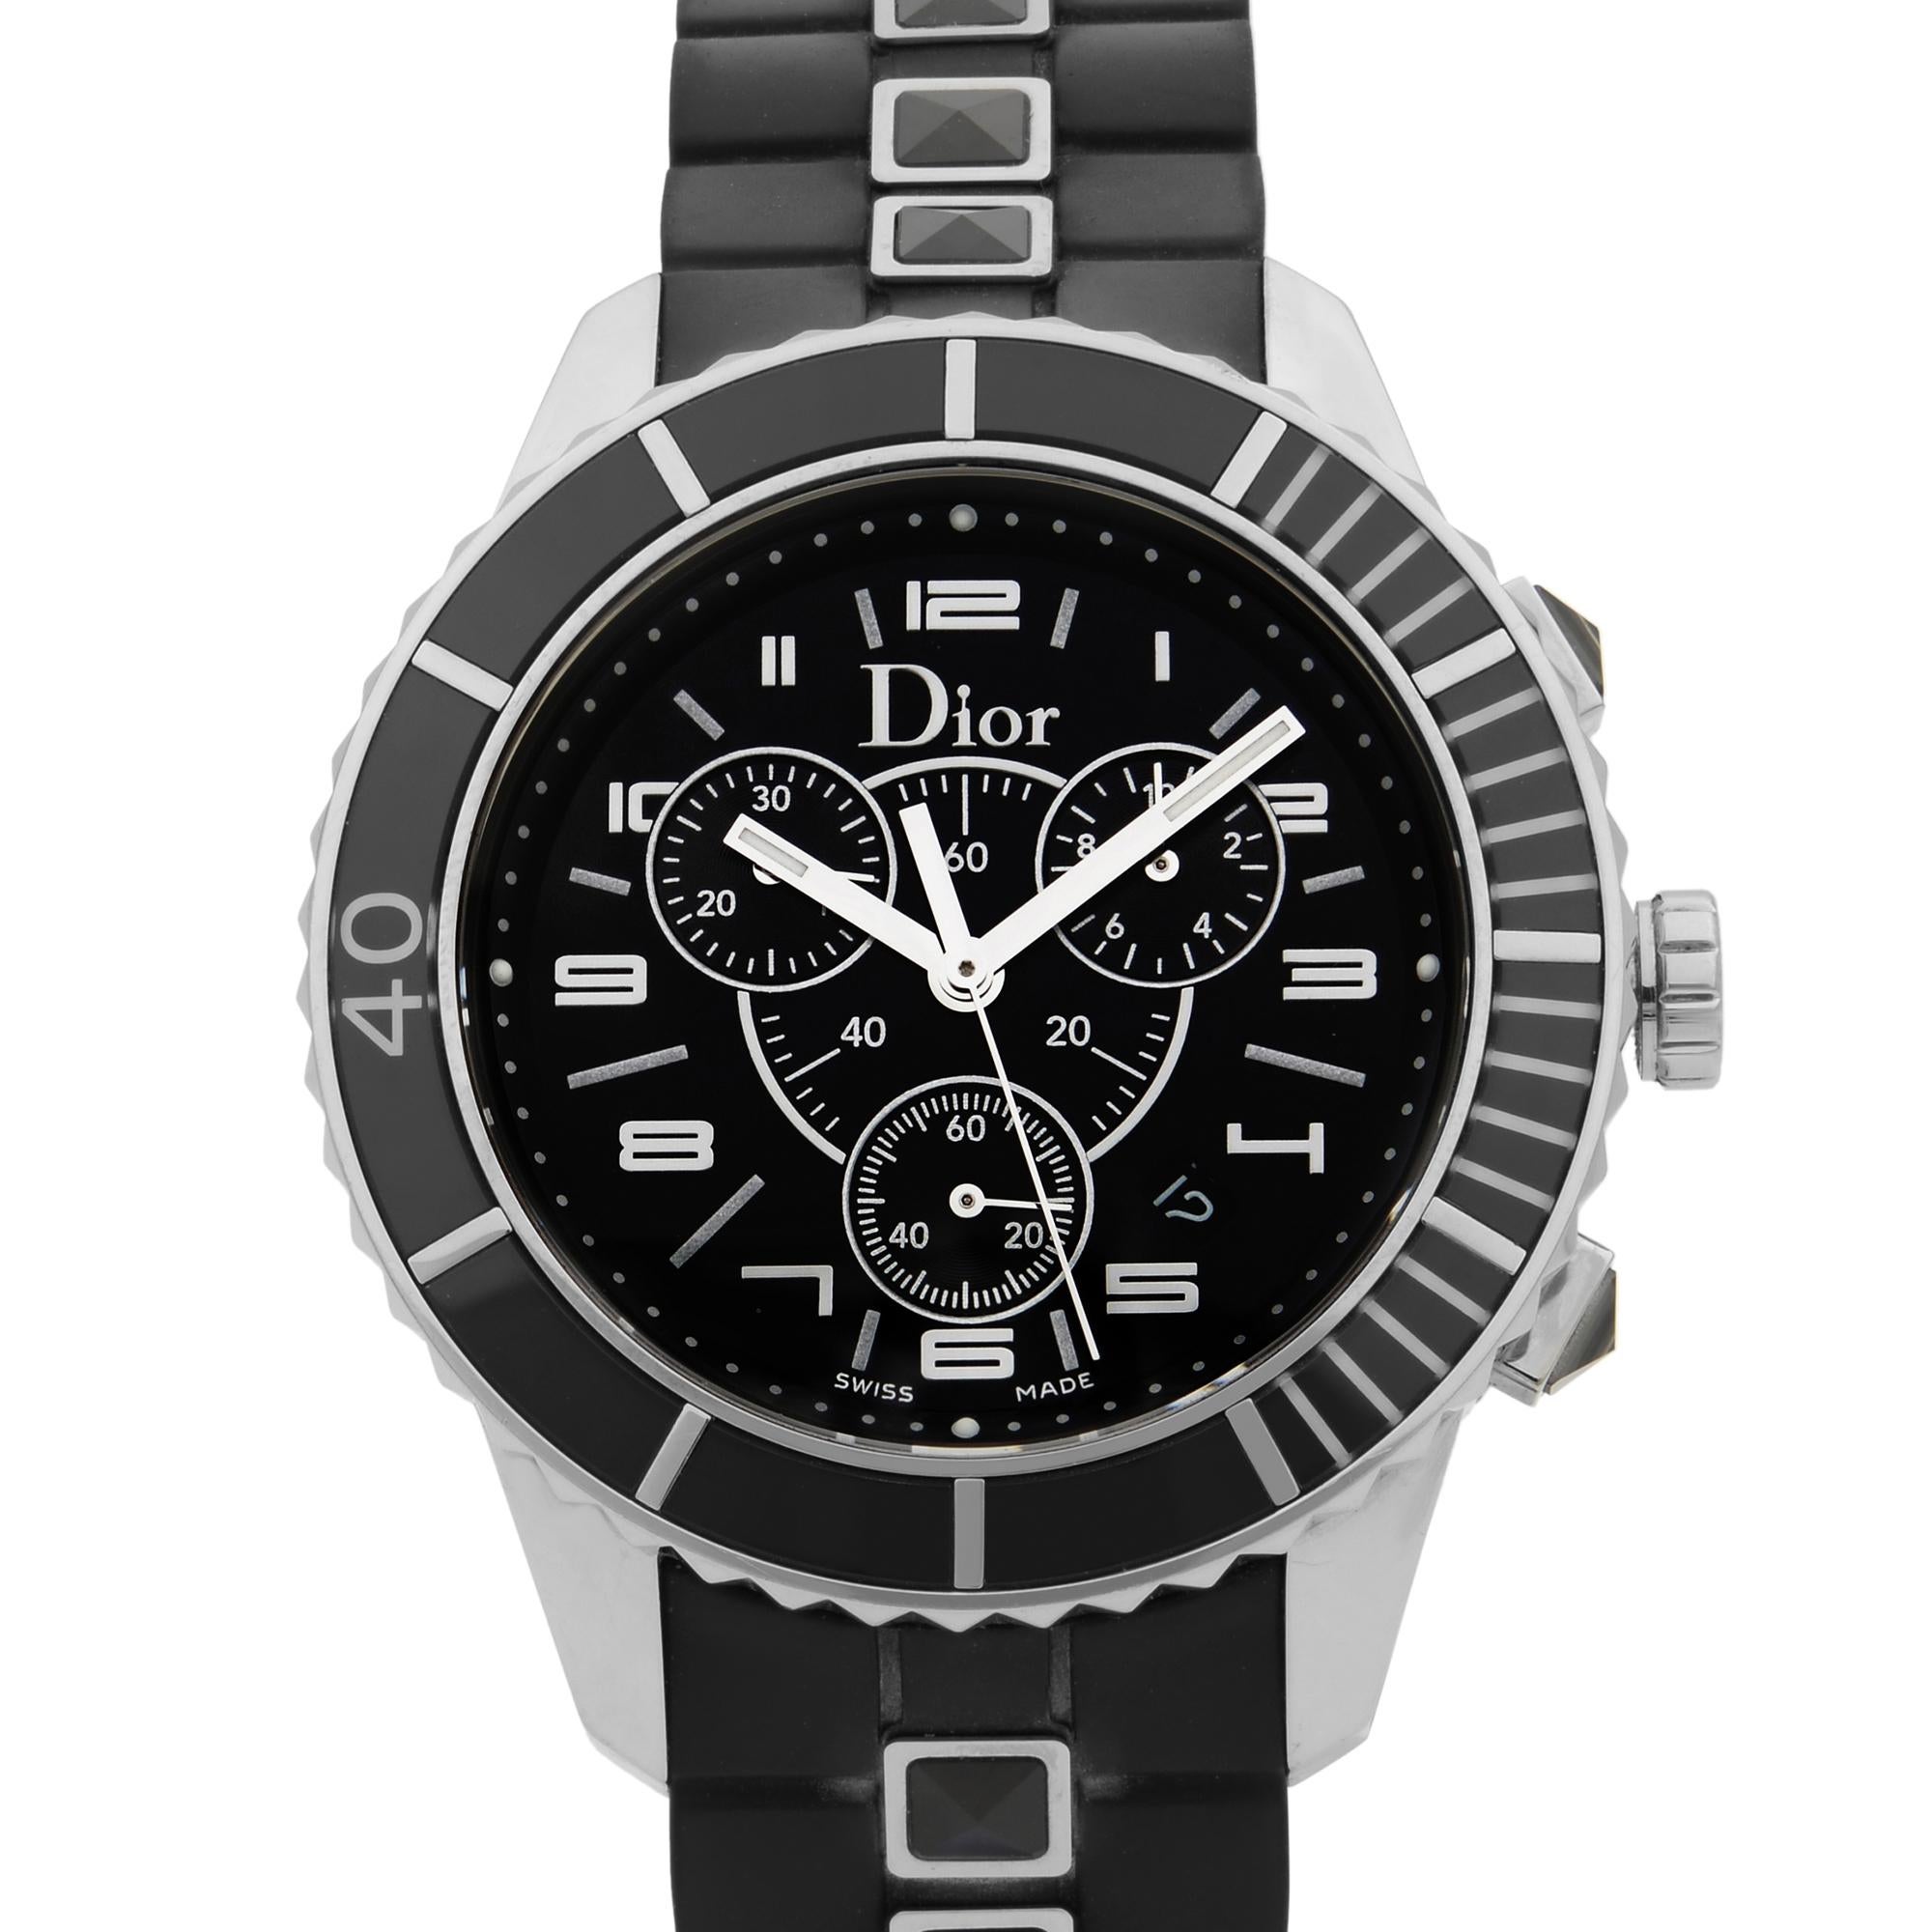 This pre-owned Christian Dior Christal  CD114317 is a beautiful Unisex timepiece that is powered by quartz (battery) movement which is cased in a stainless steel case. It has a round shape face, chronograph, chronograph hand, date indicator, small